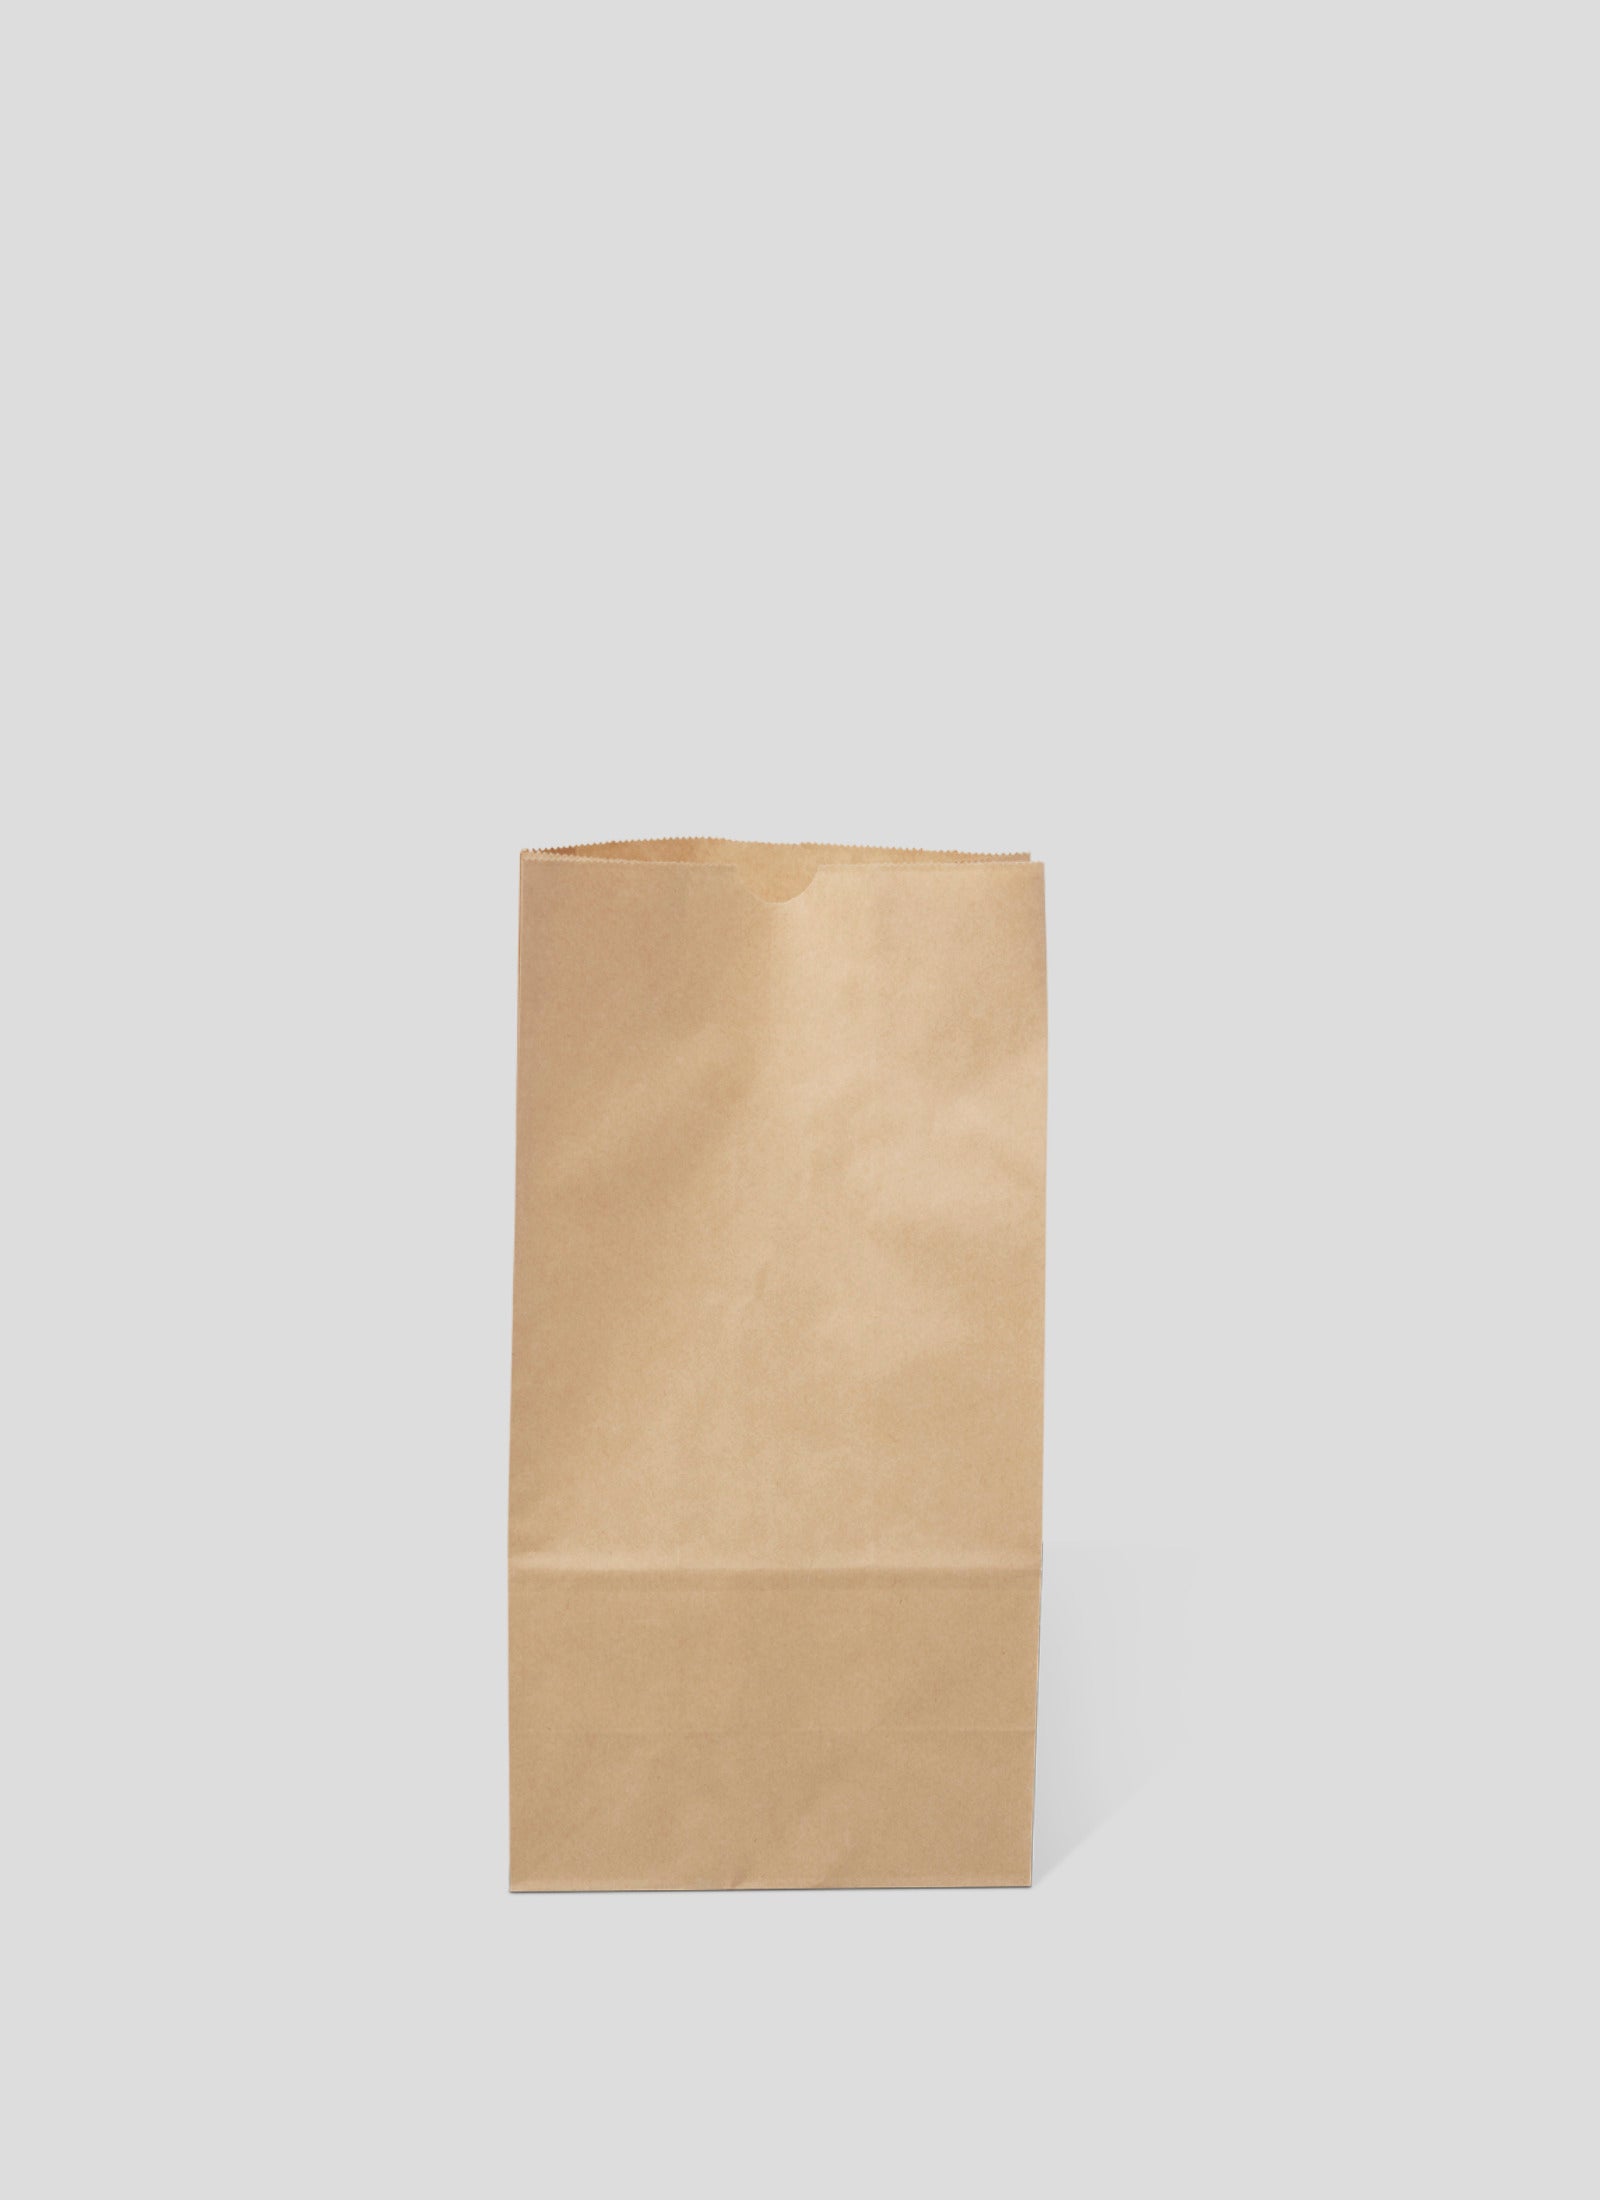 Front View Medium Takeaway Bags. - Soyle